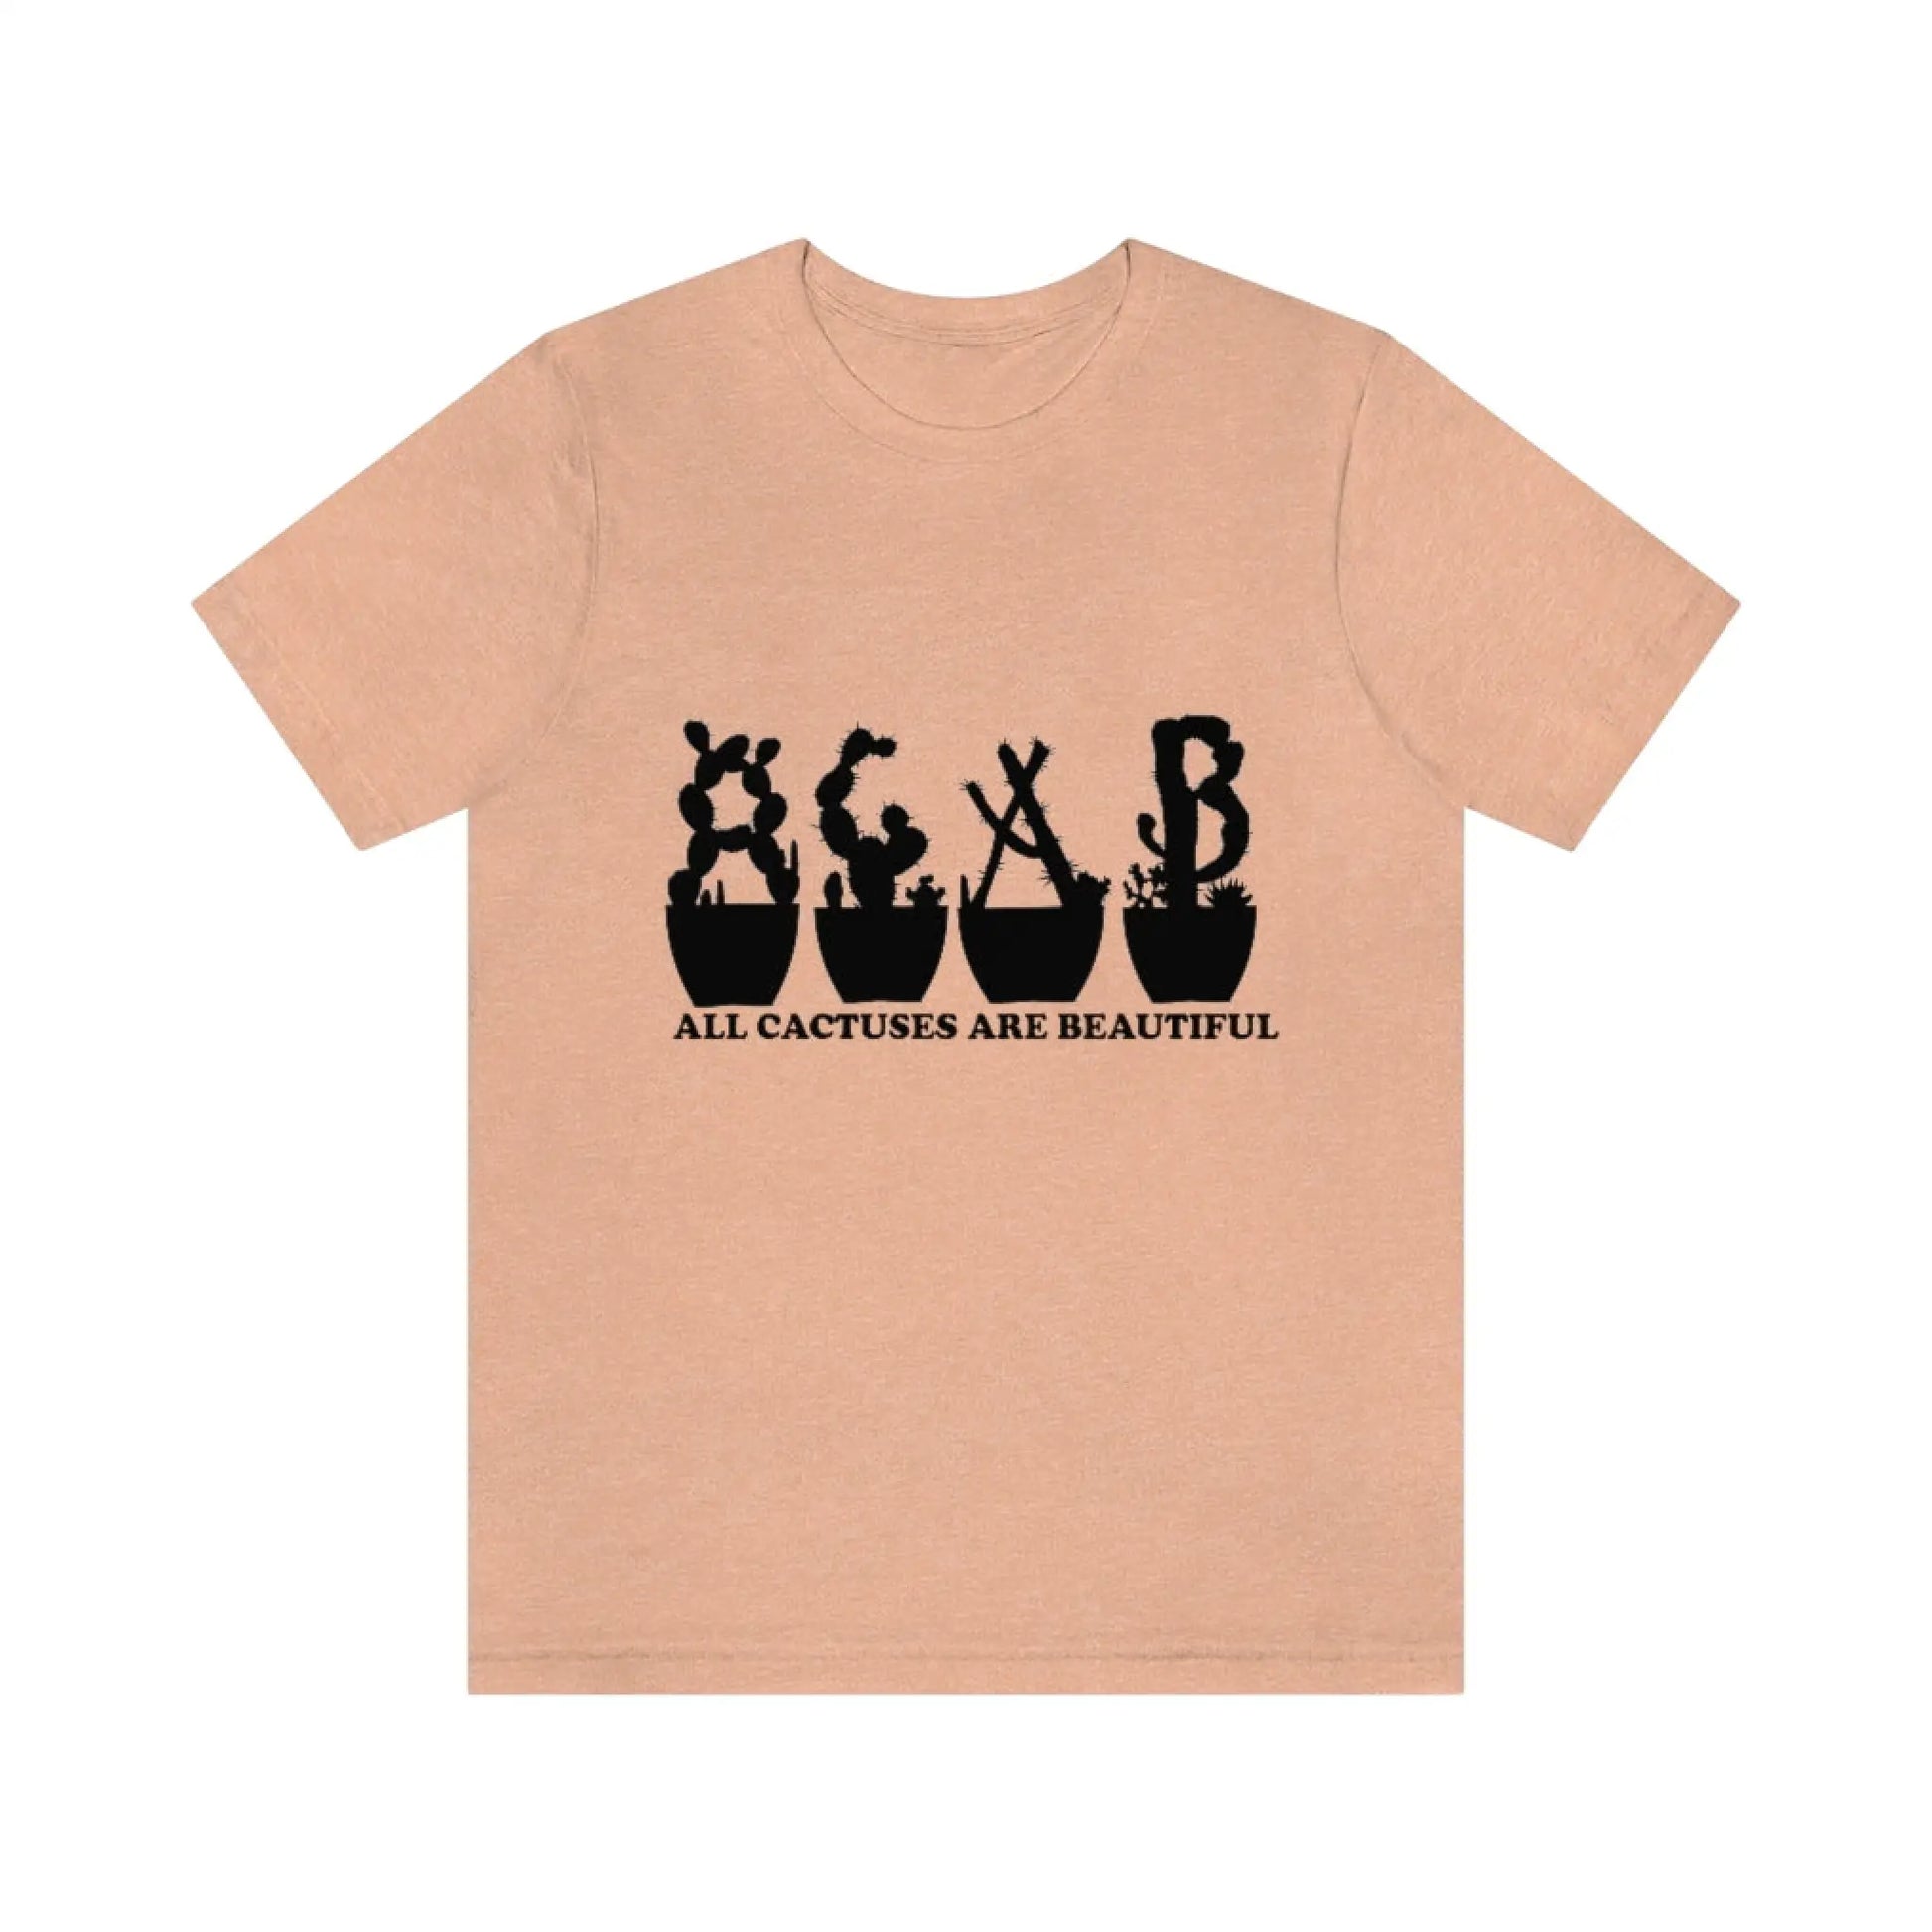 Shirts XL - All Cactuses Are Beautiful - Heather Peach /